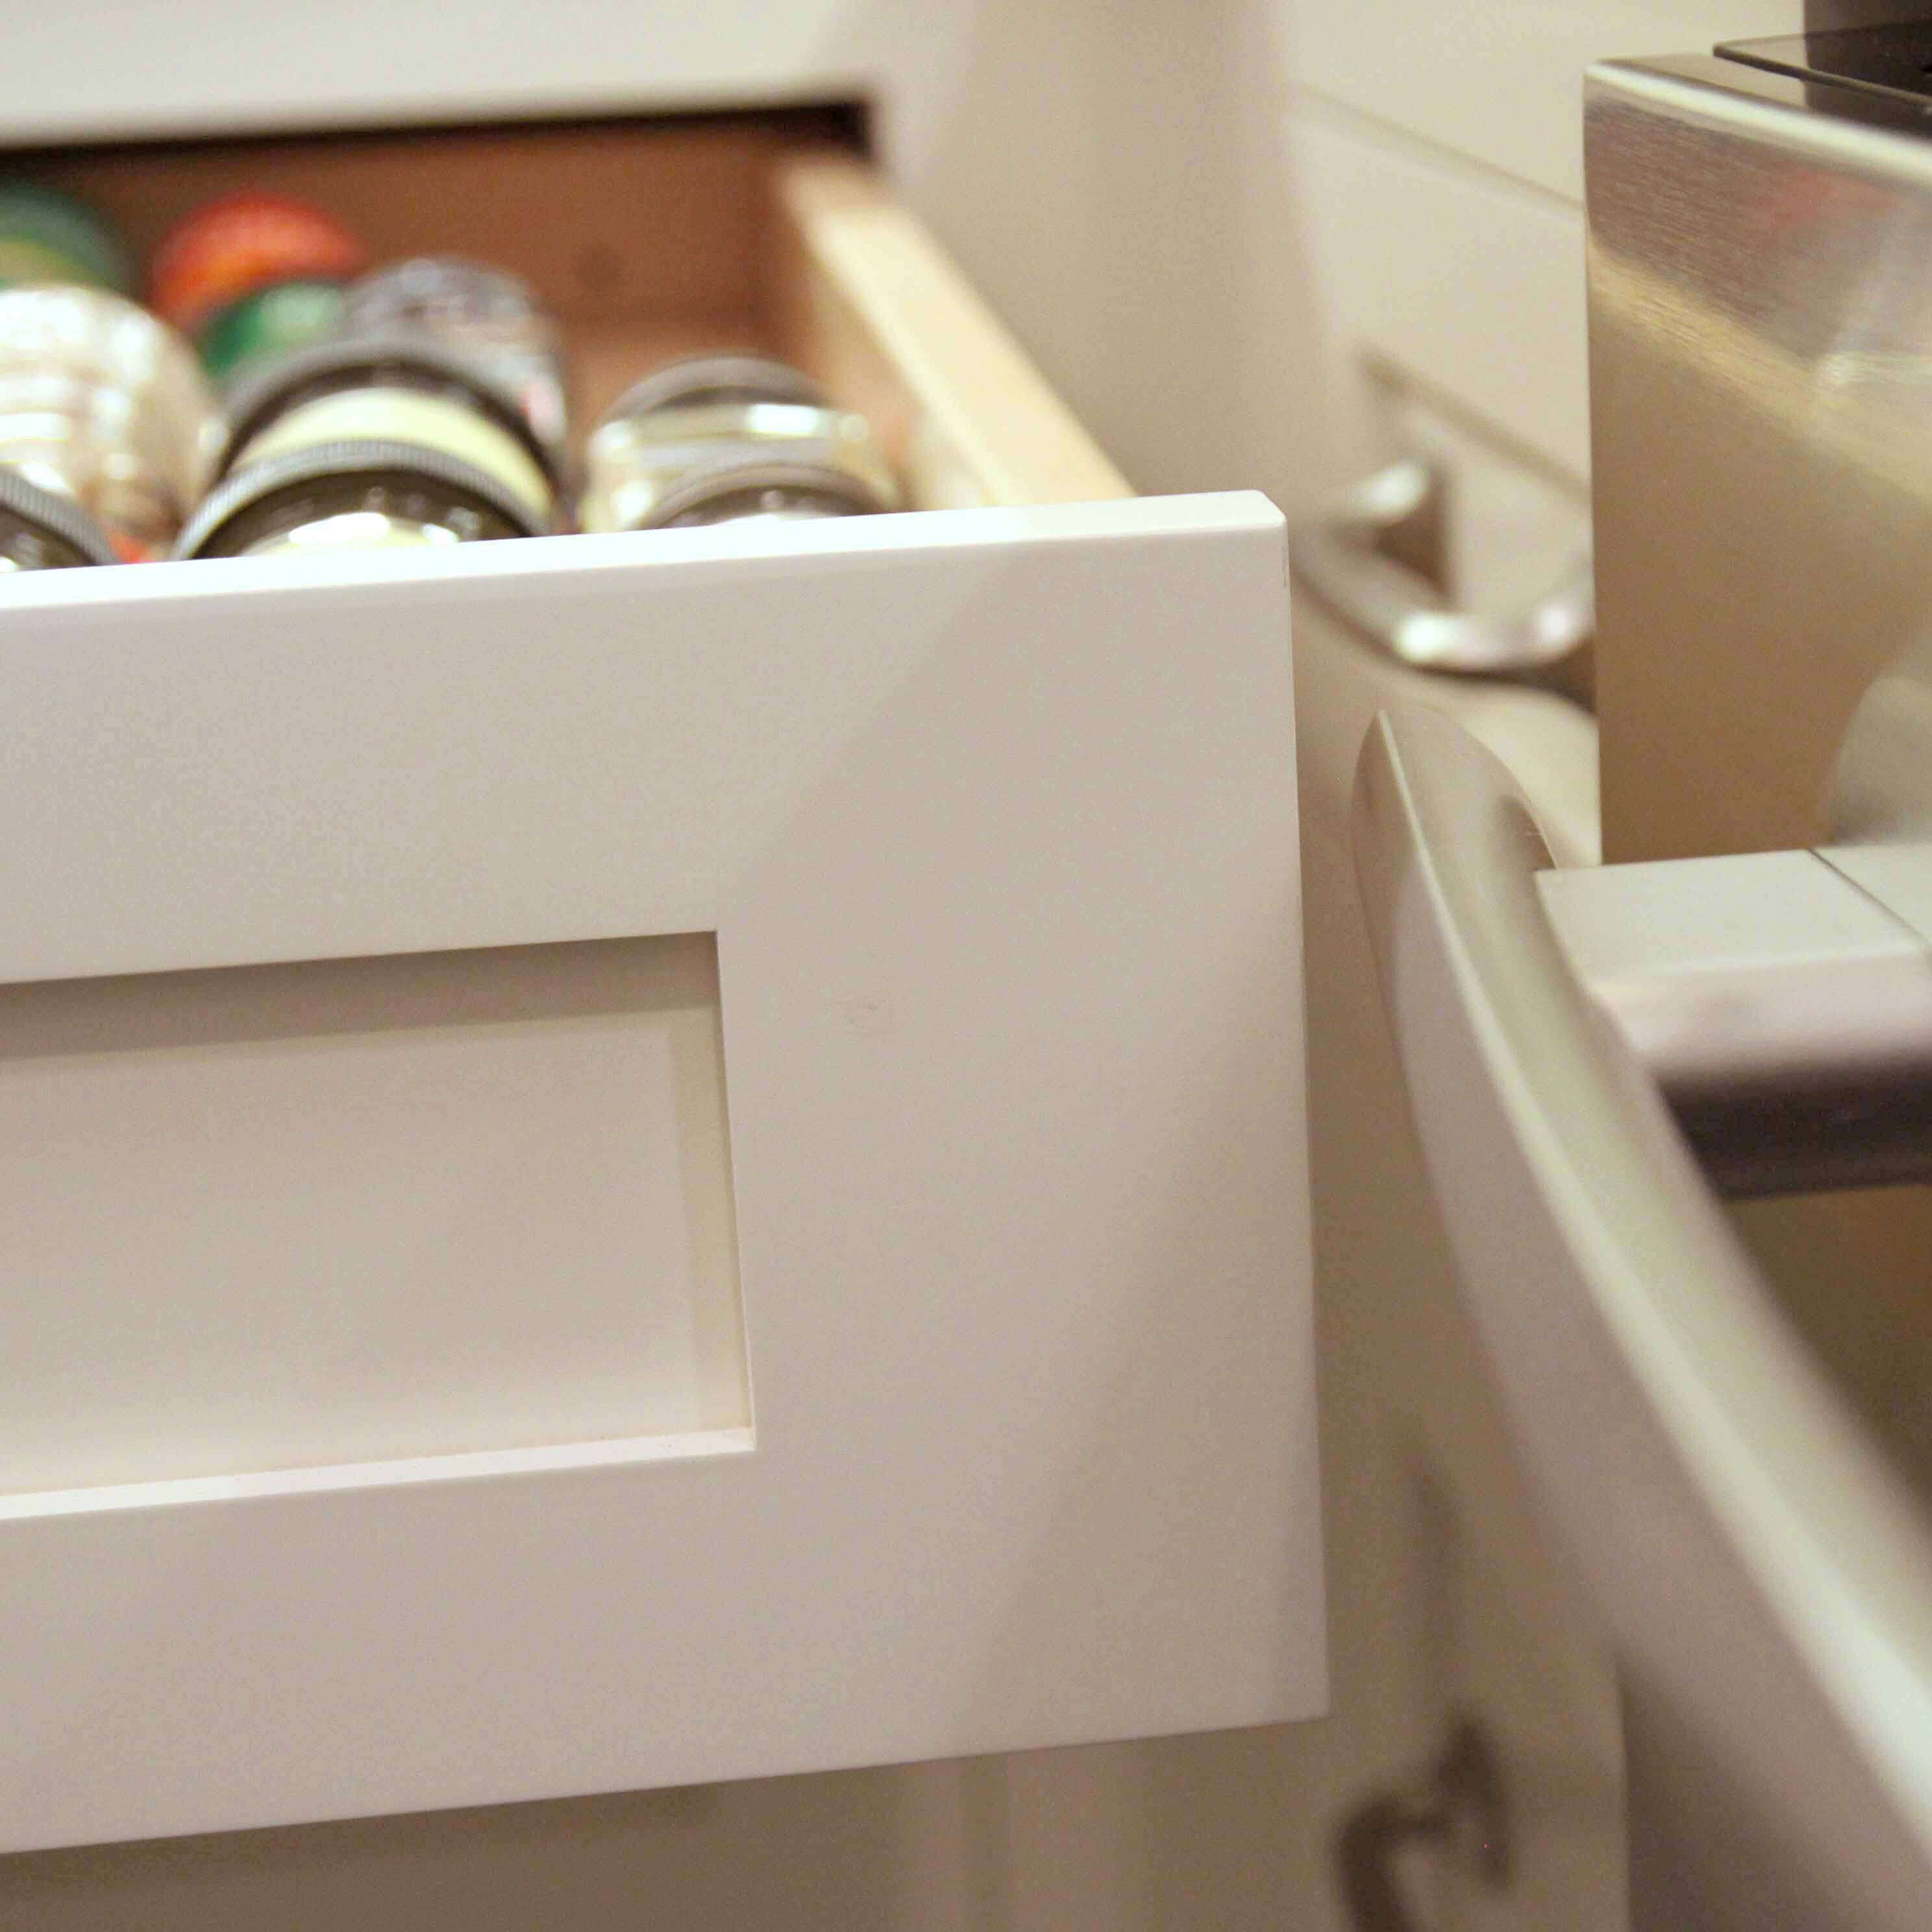 A kitchen drawer in the corner was designed to have enough space to clear the appliance handle with out colliding into it.